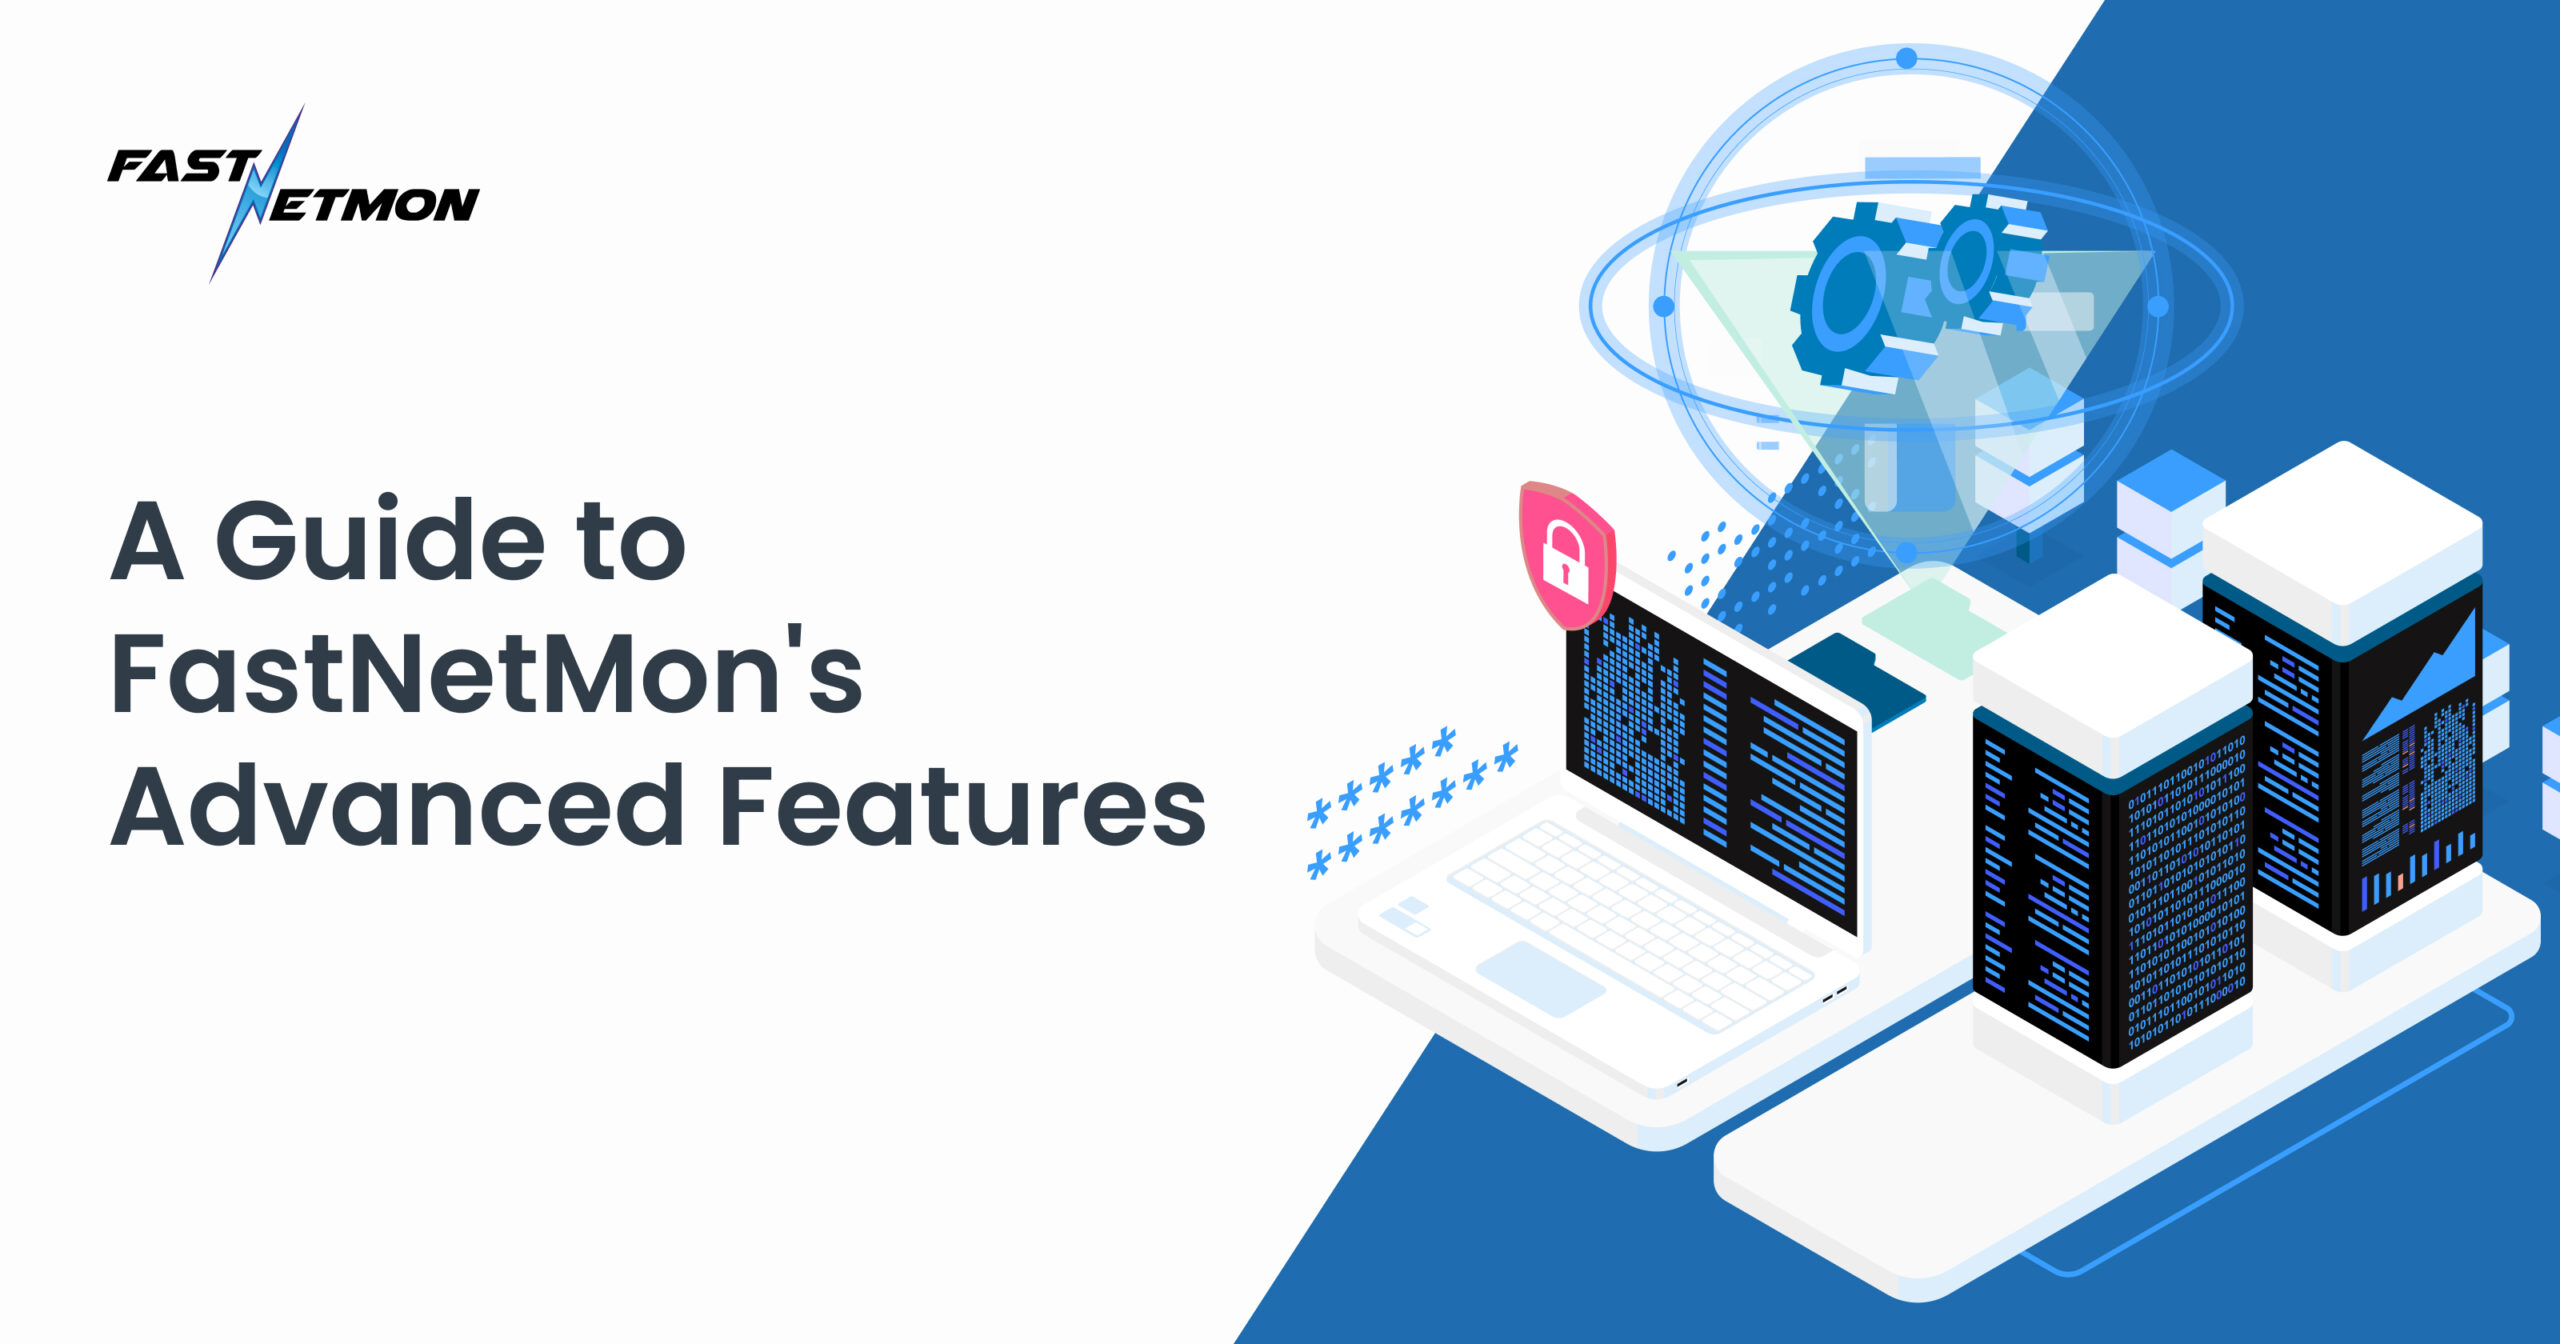 A Guide to FastNetMon's Advanced Features